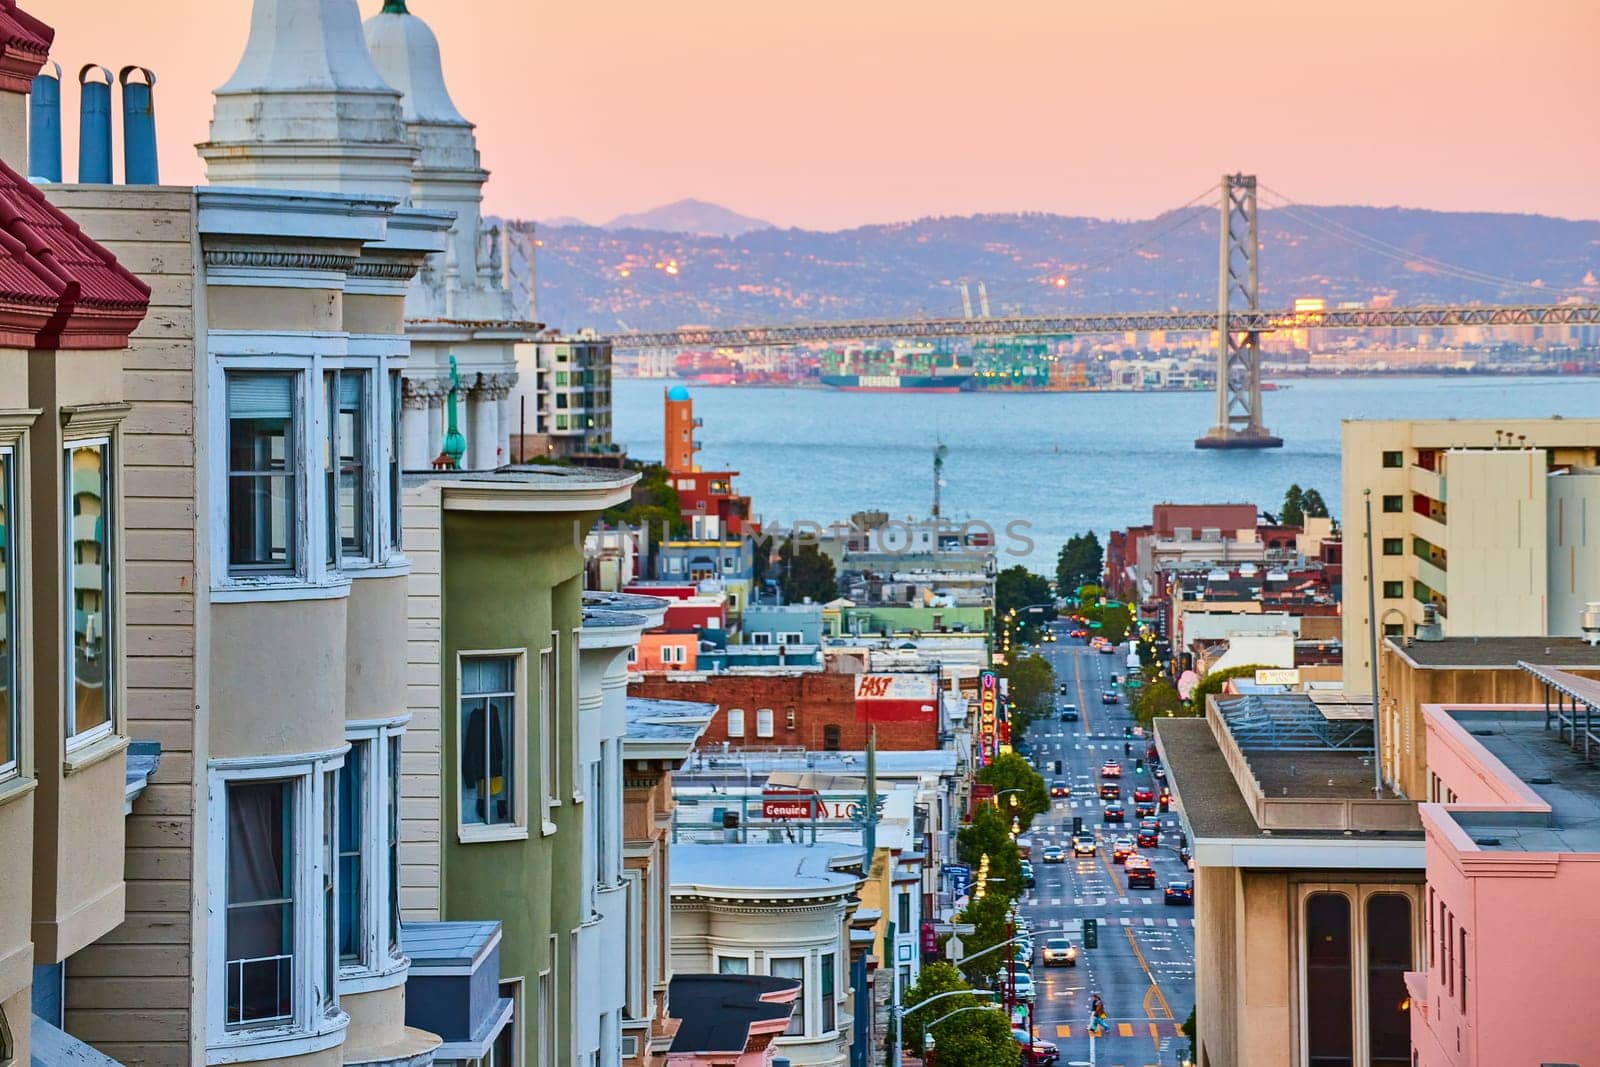 Image of Pink sunrise lighting over residential area of San Francisco with Oakland Bay Bridge and view of bay